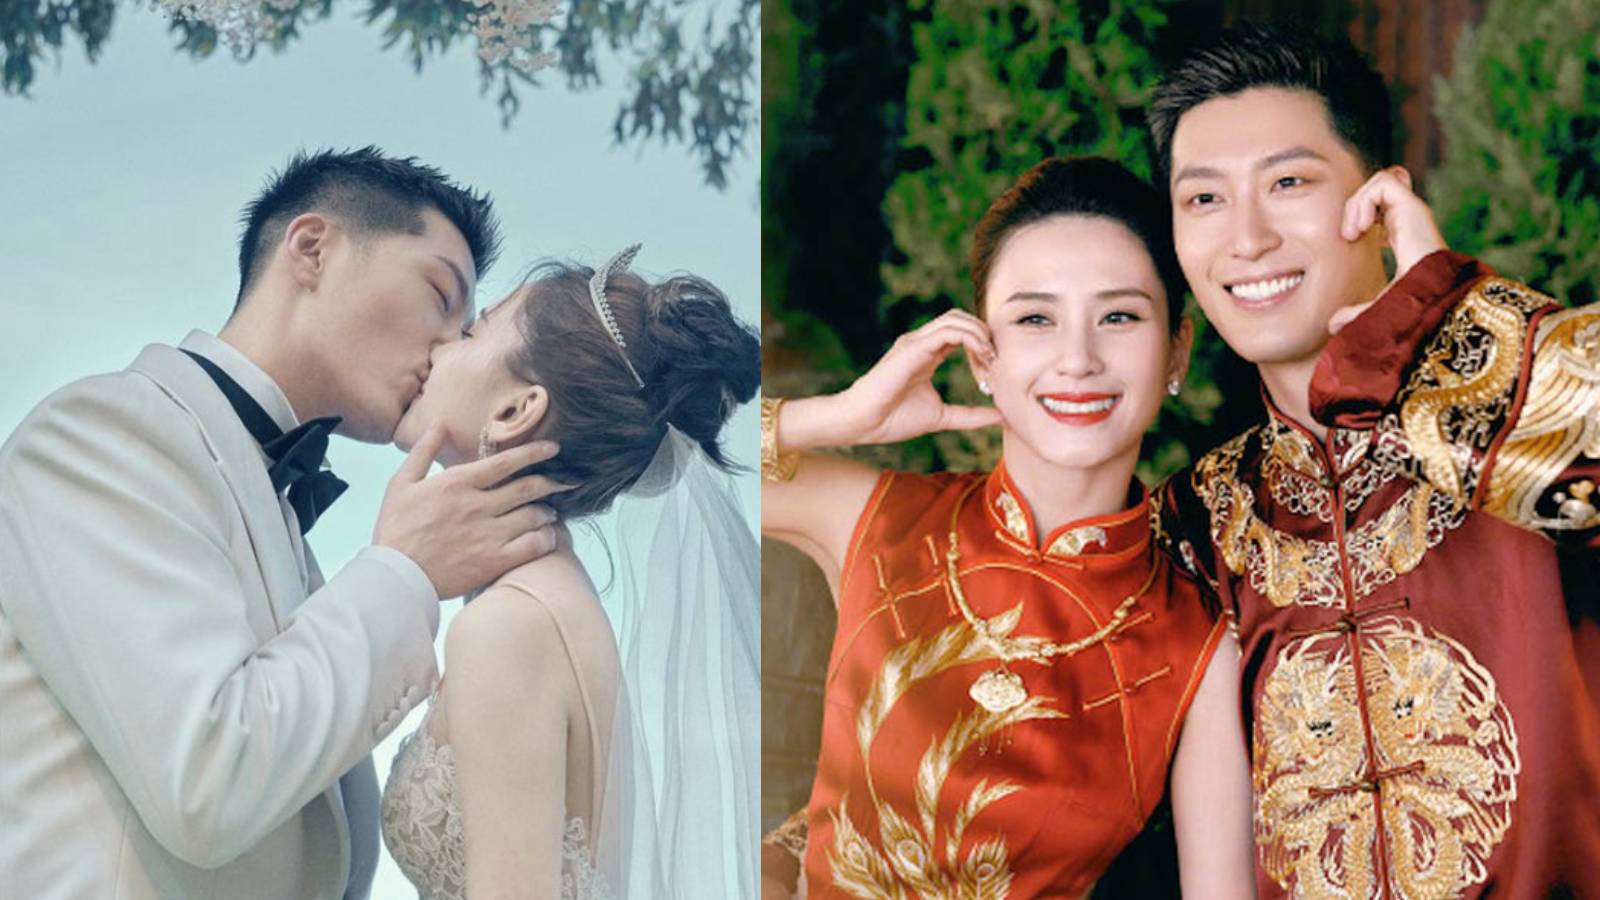 Late Casino Kings Daughter Laurinda Ho Marries Chinese Actor Shawn Dou In S$8.5Mil Bali Wedding